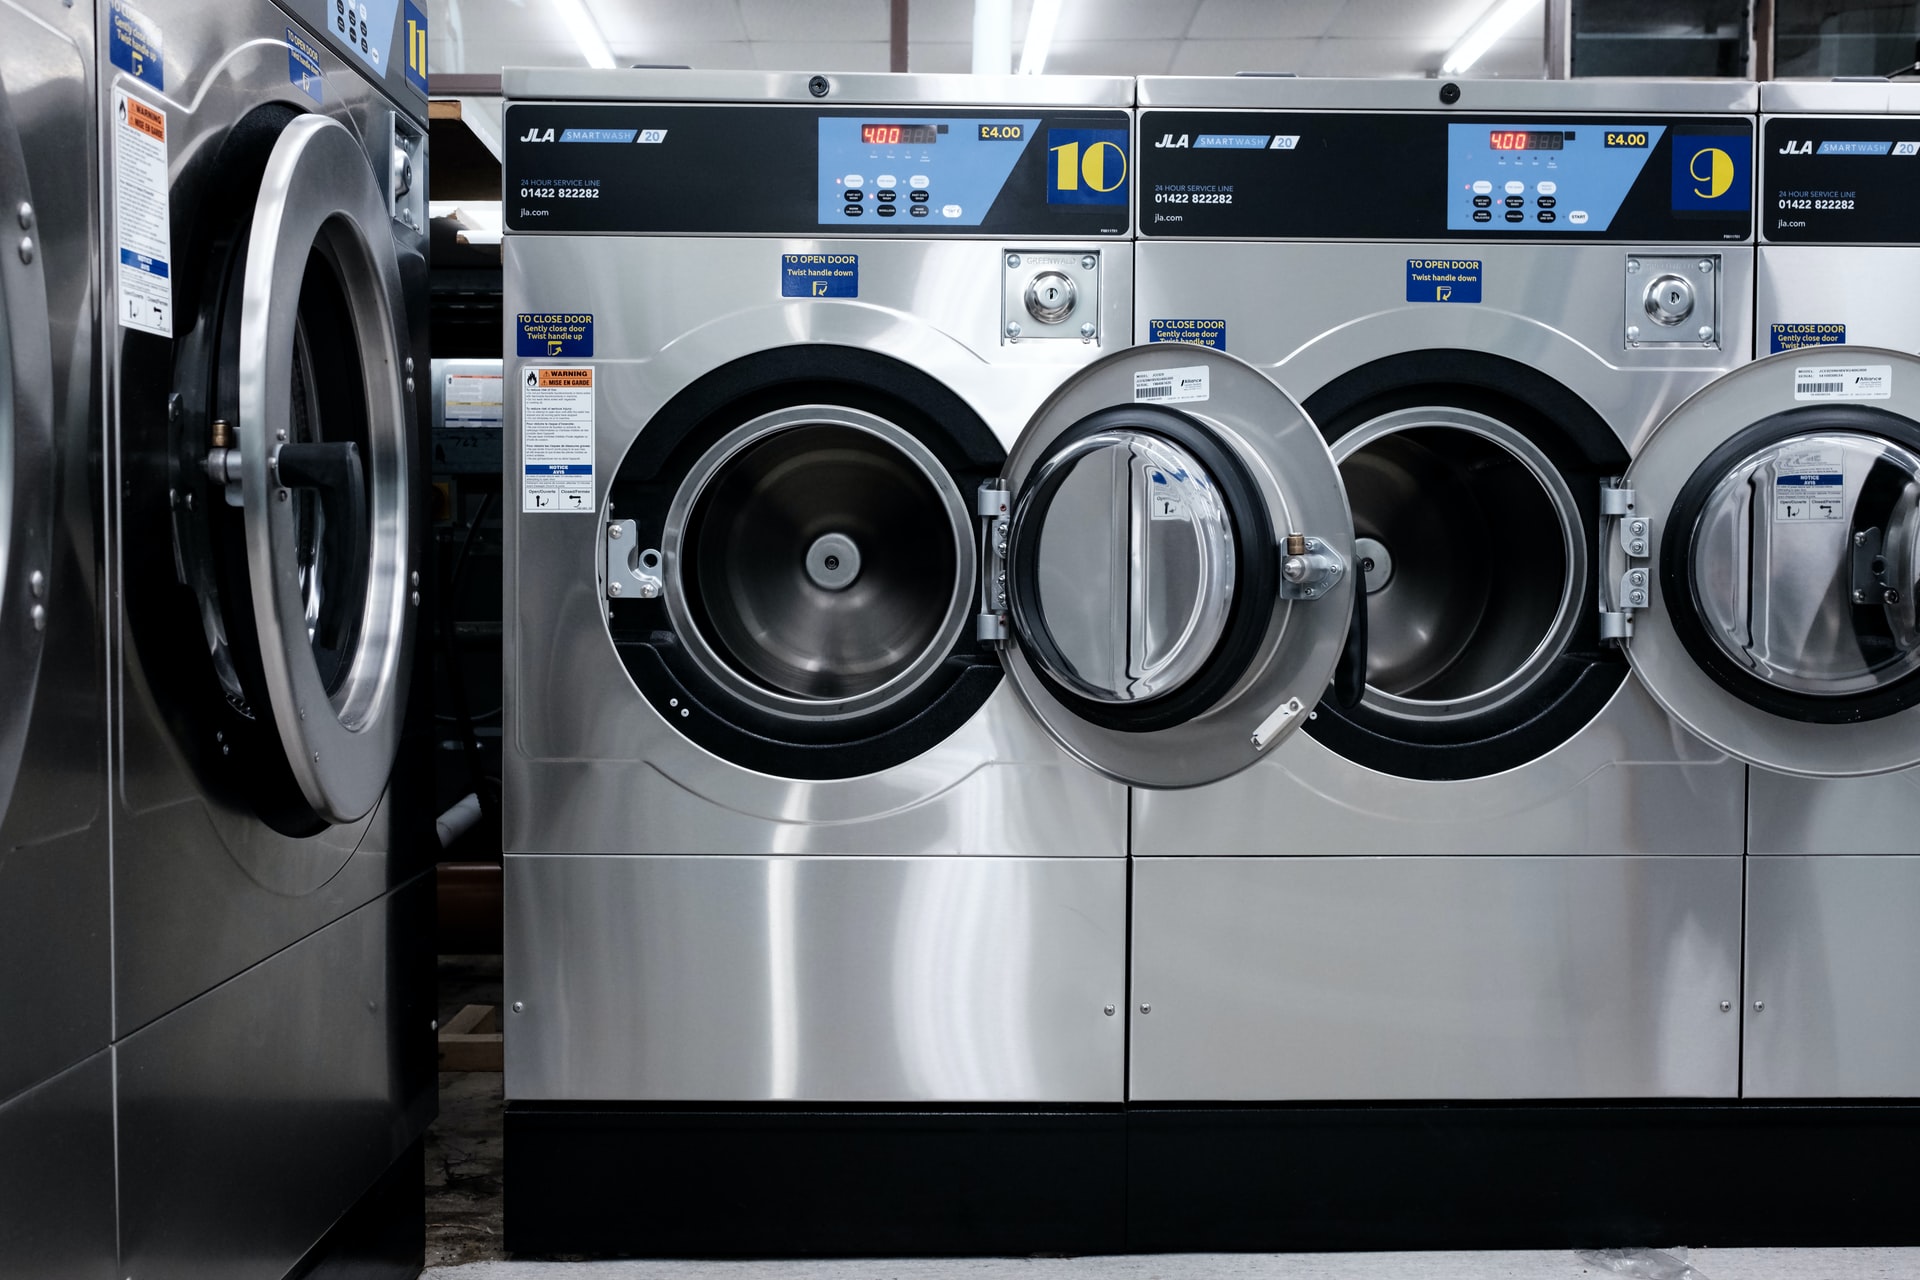 How to clean top load washing machine